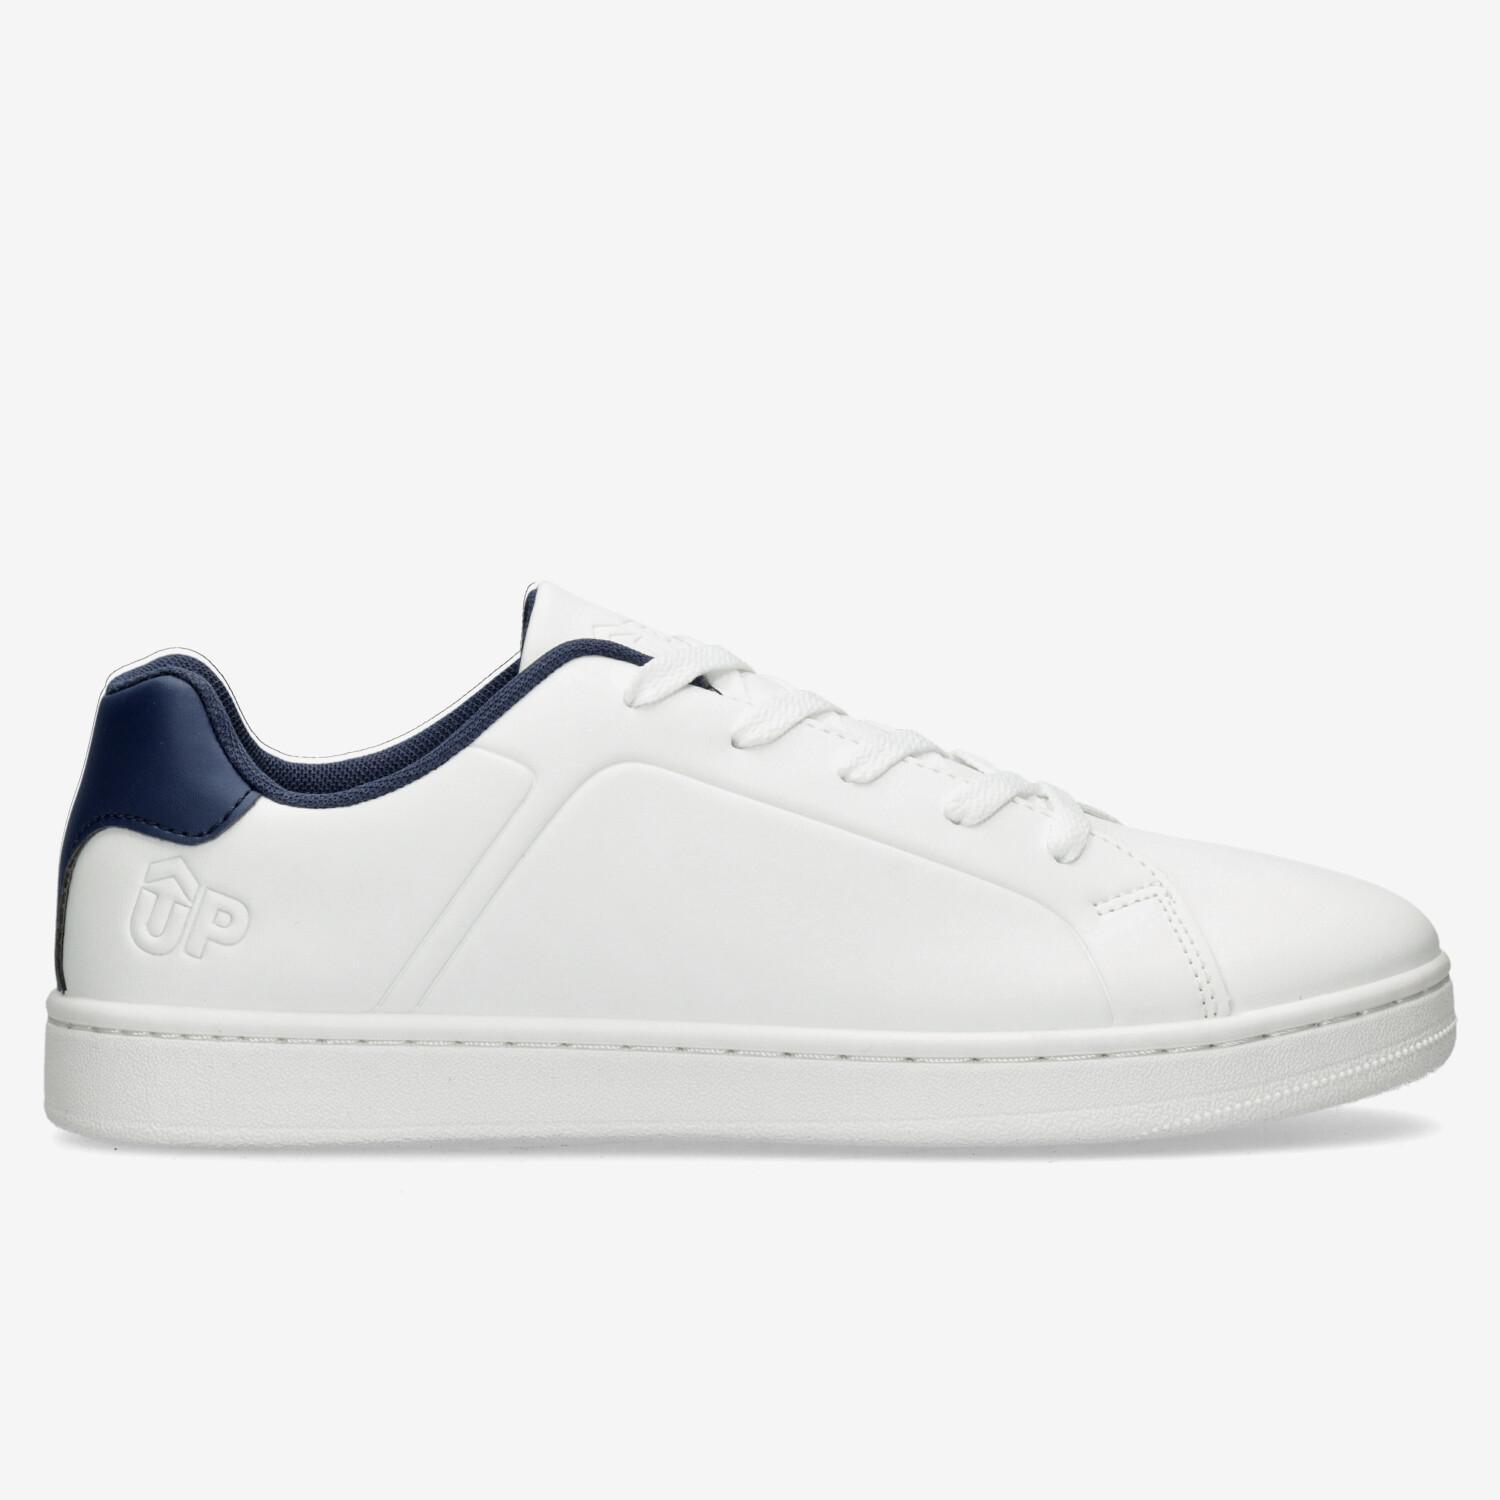 Up Arena - Blanches - Chaussures Homme sports taille 43